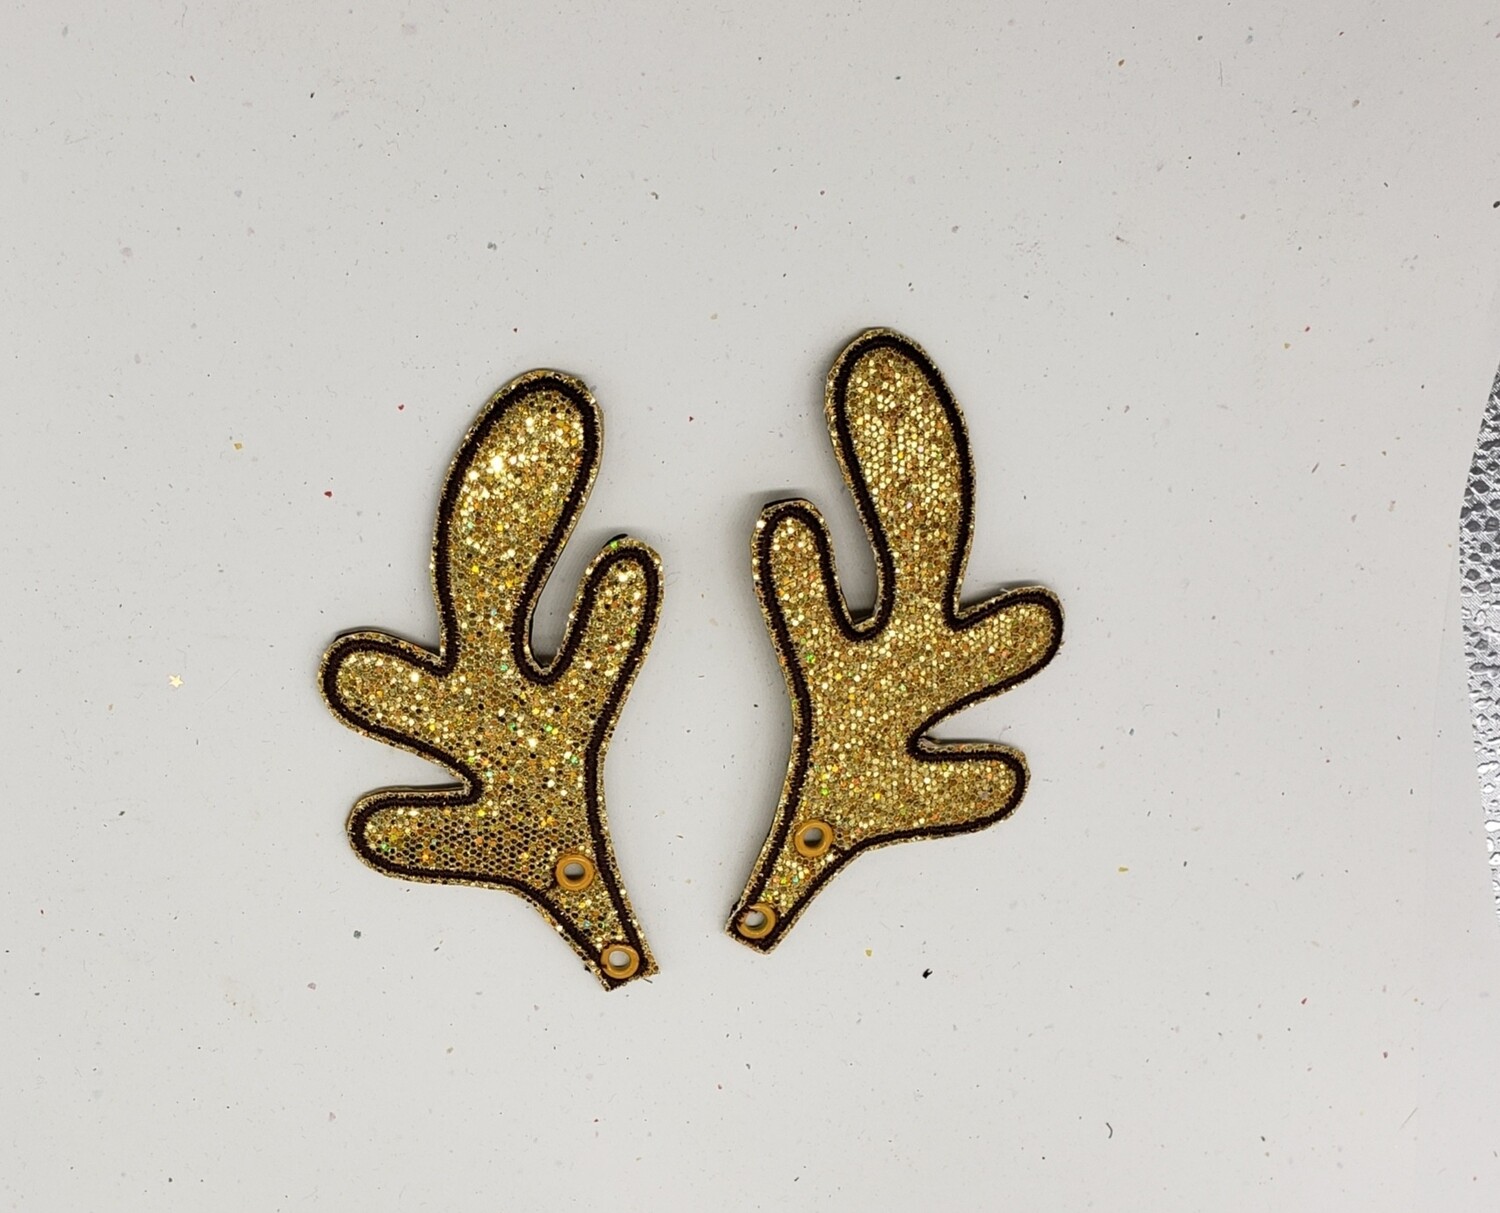 Reindeer antlers skate wings in gold glittery fabric rts